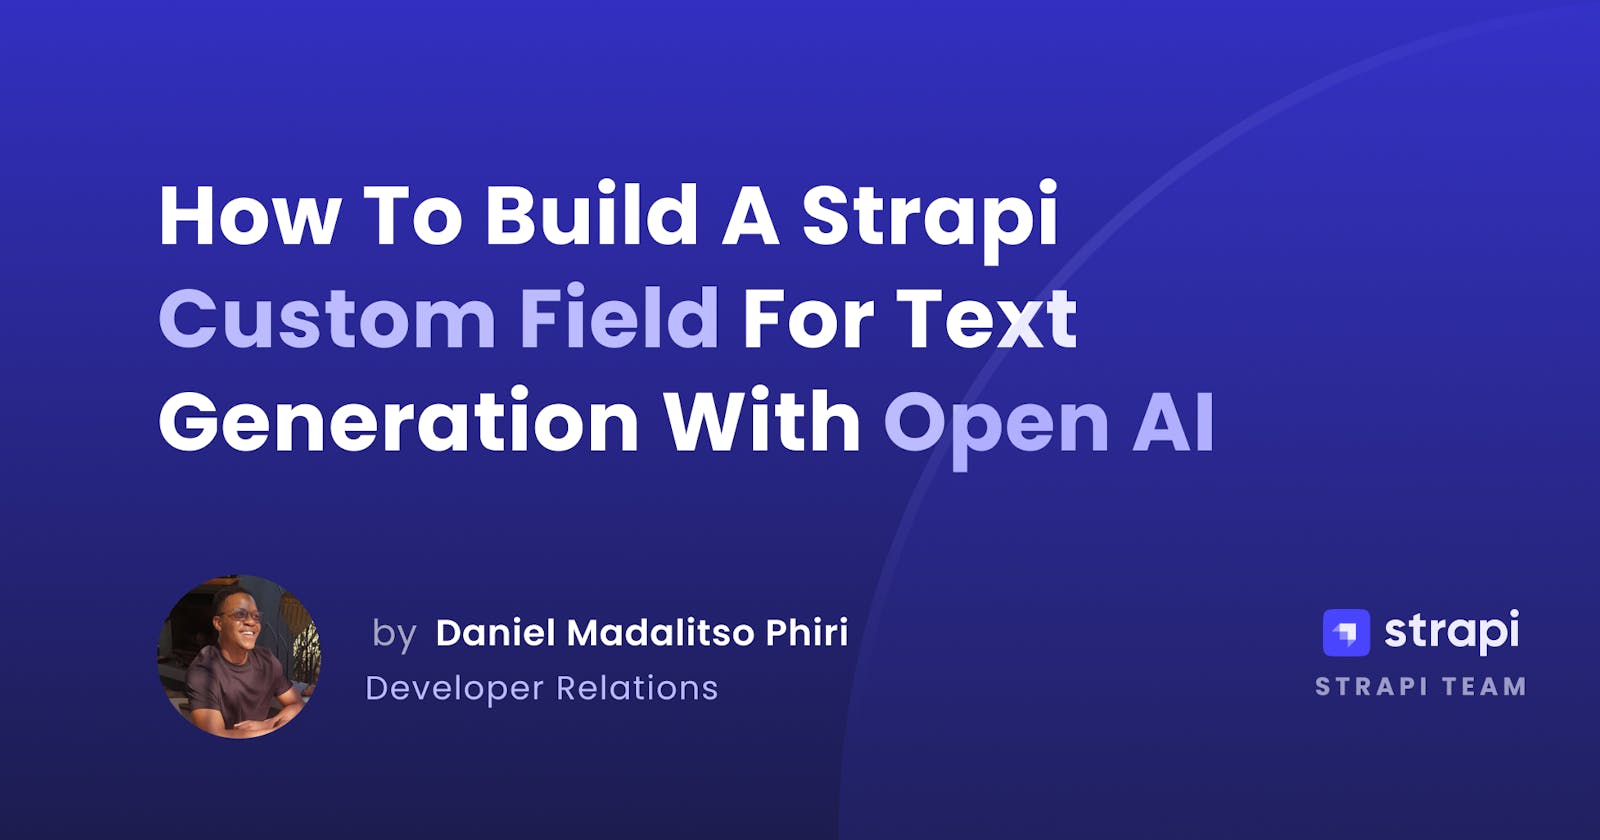 How To Build A Strapi Custom Field For Text Generation With Open AI